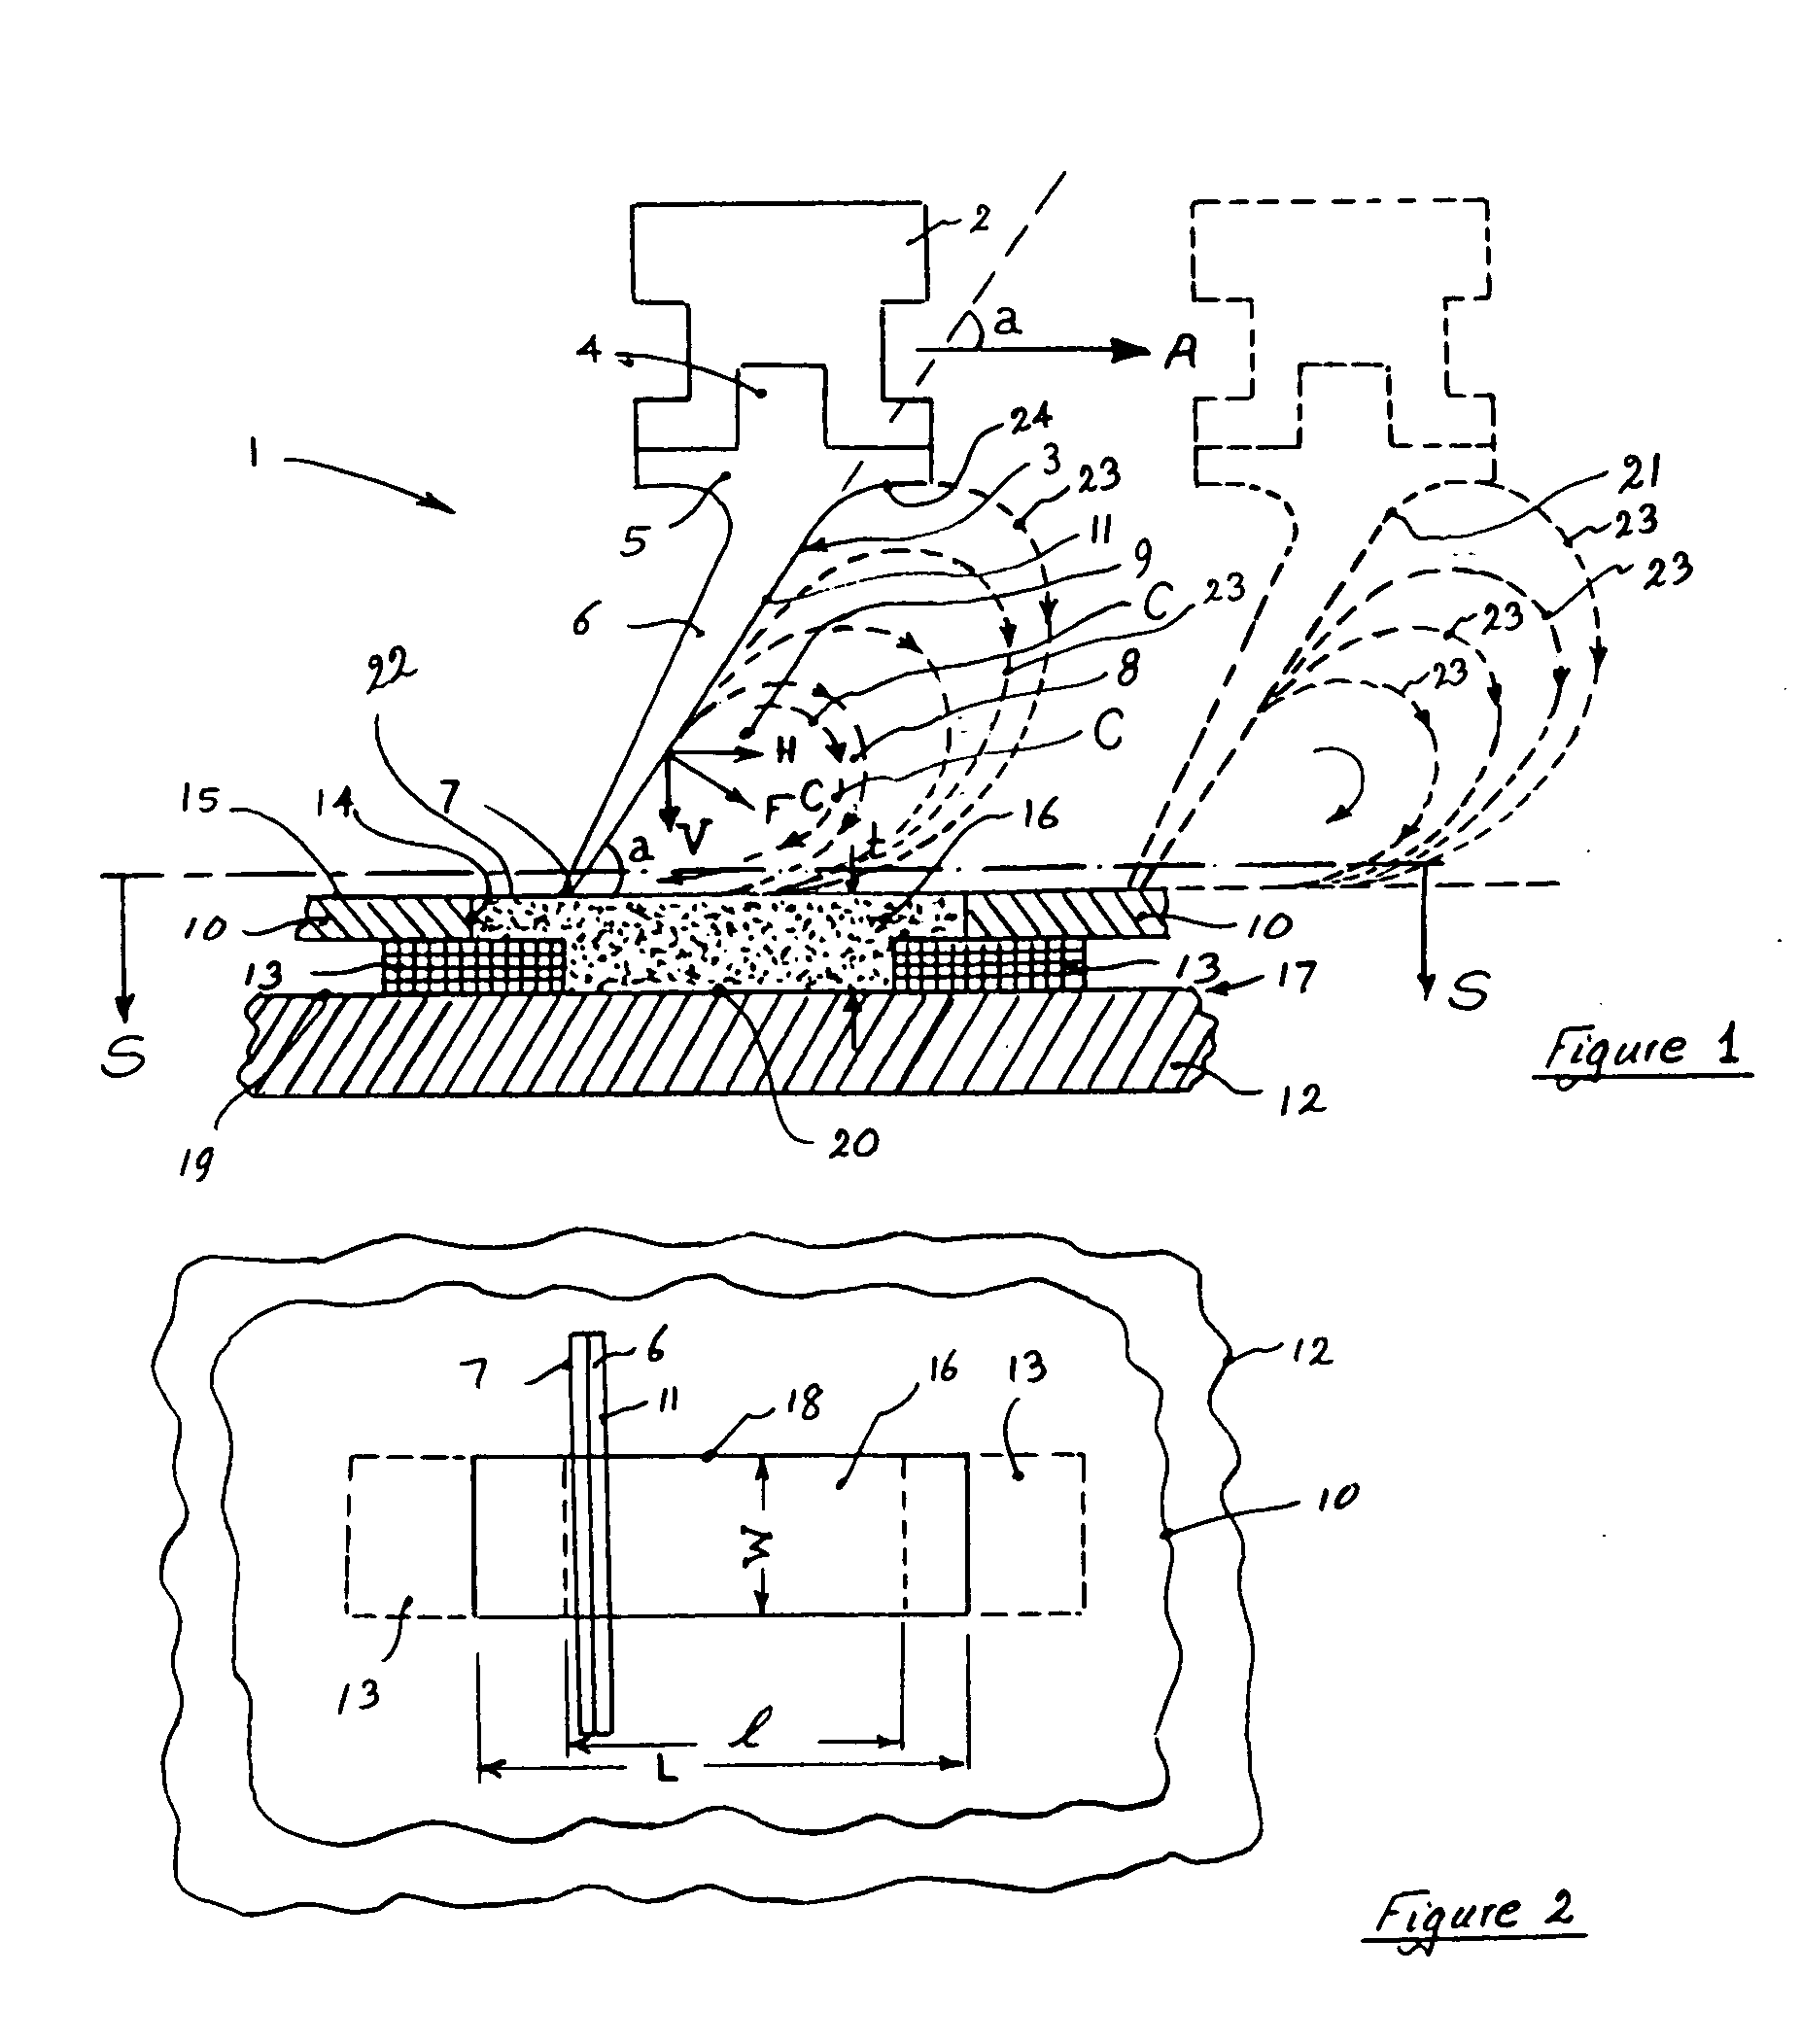 Polymer thick-film resistive paste, a polymer thick-film resistor and a method and an apparatus for the manufacture thereof